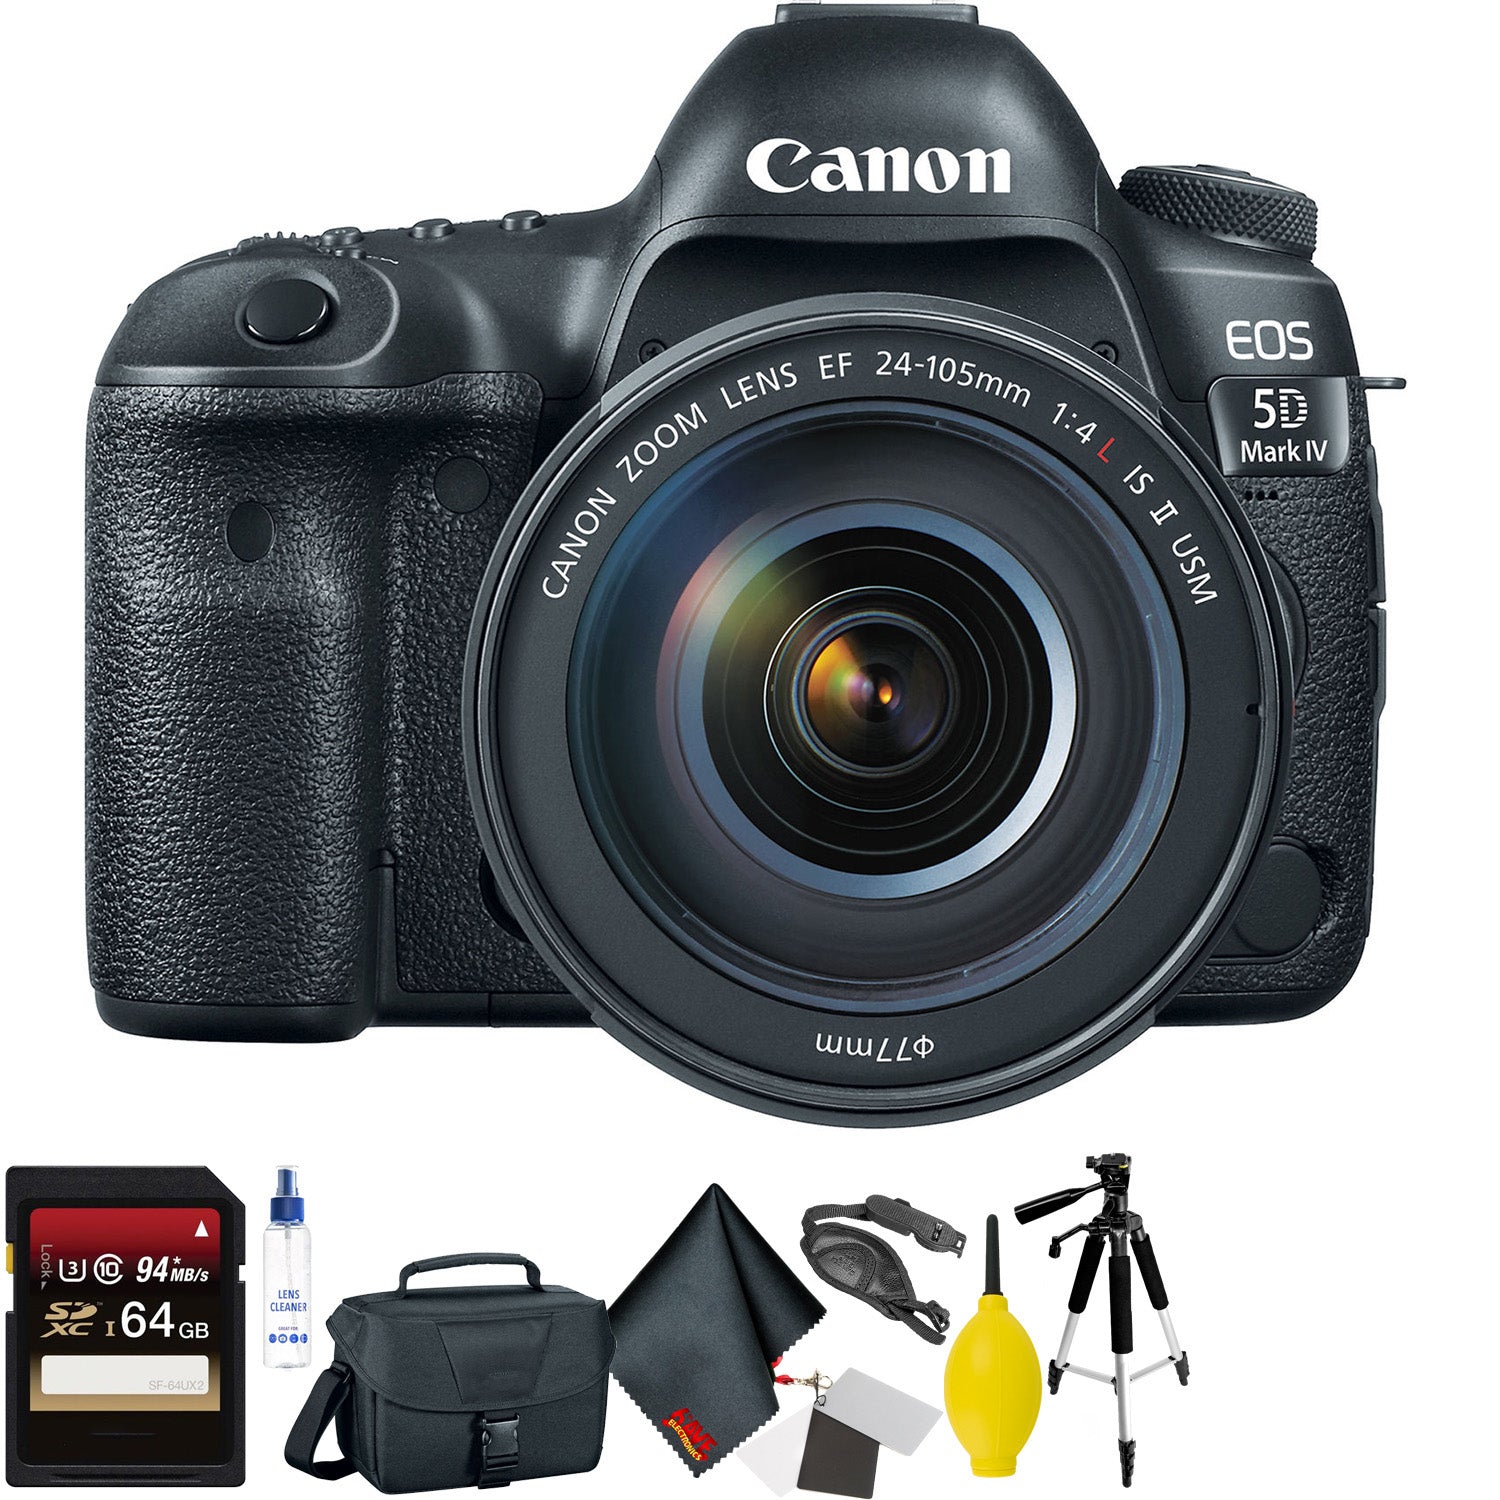 Canon EOS 5D Mark IV DSLR Camera with 24-105mm f/4L II Lens + 64GB Memory Card + Mega Accessory Kit + 2 Year Accidental